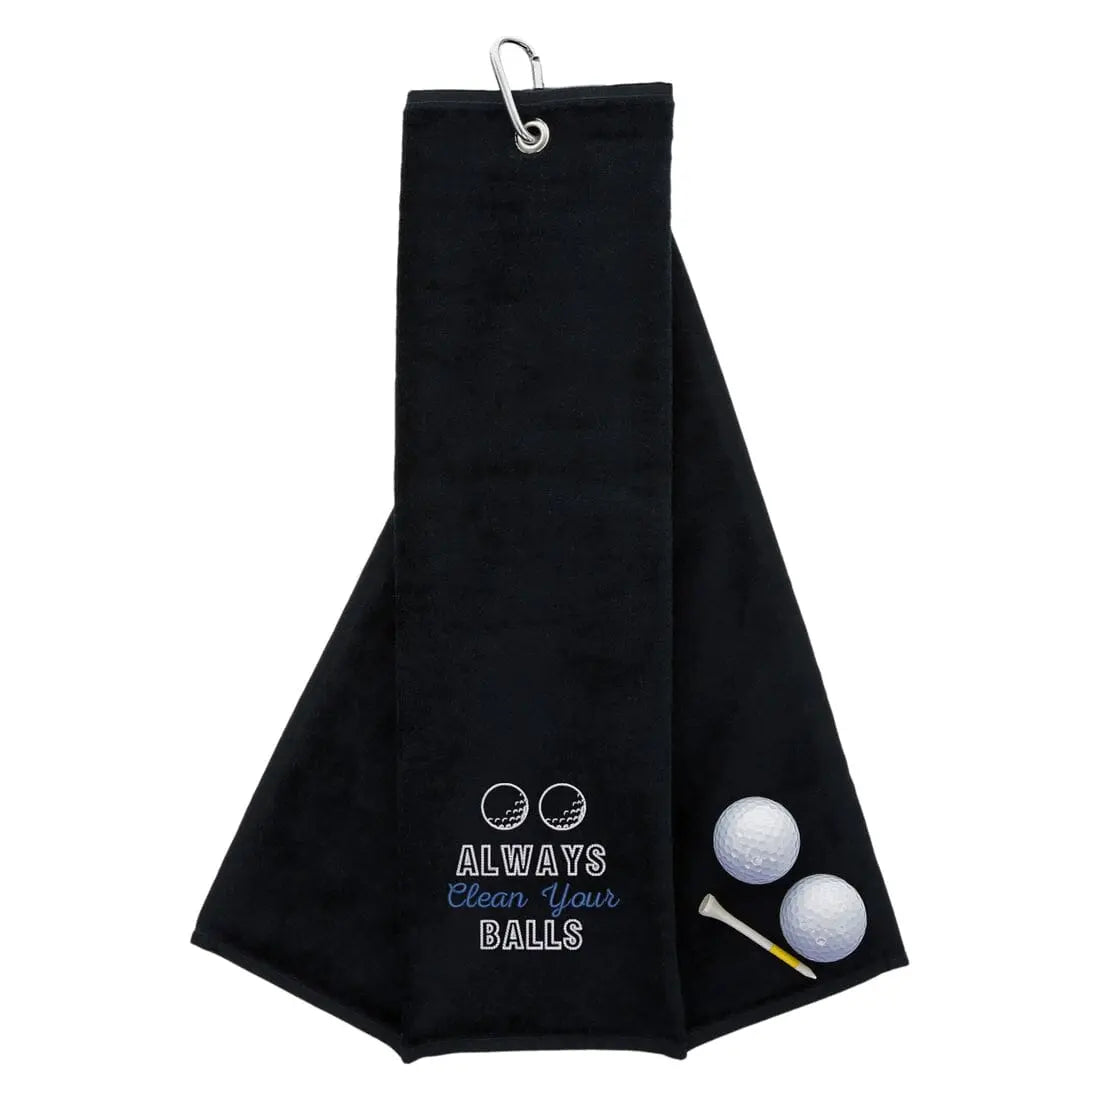 Tri-Fold Golf Towel Embroidered With Cheeky Clean Your Balls Logo Black  